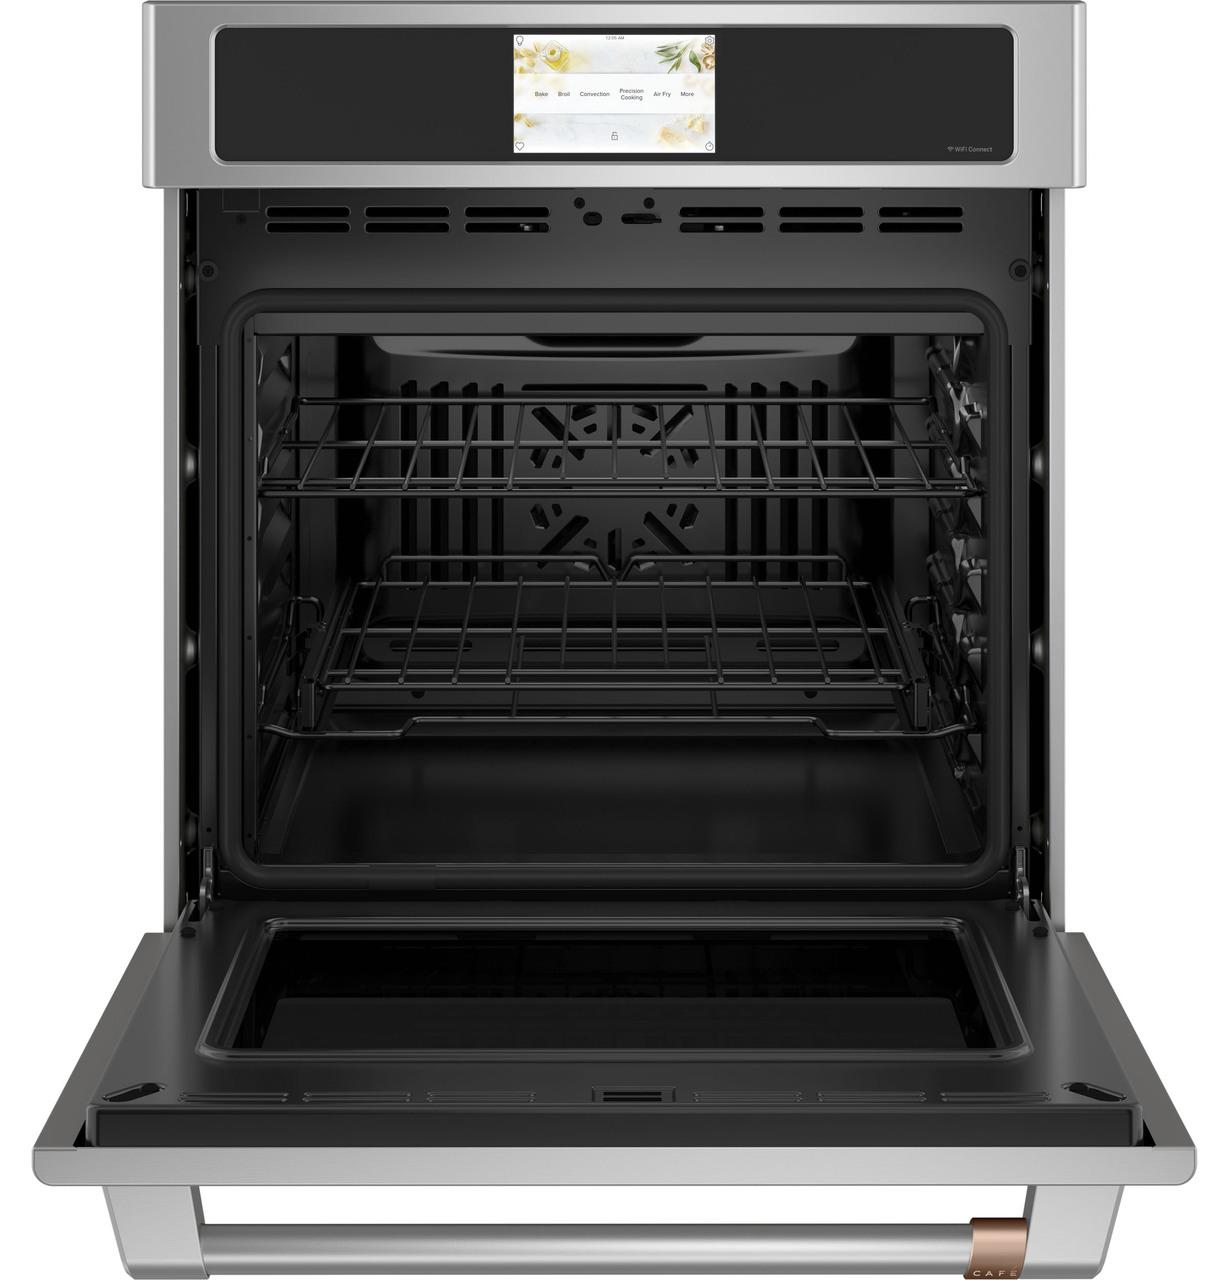 Cafe Caf(eback)™ 27" Smart Single Wall Oven with Convection